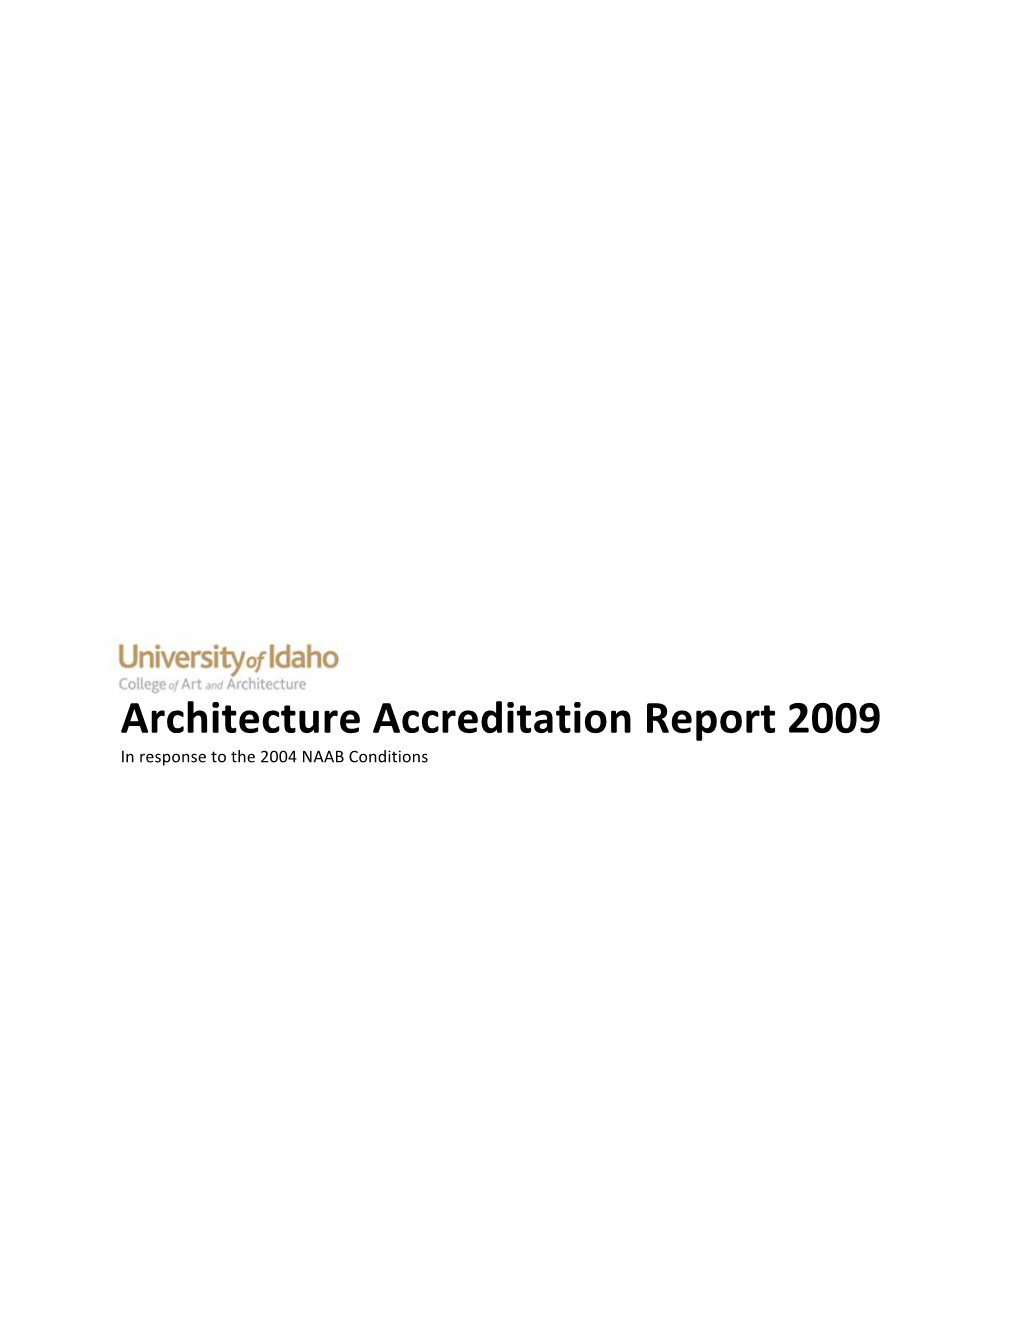 Architecture Accreditation Report 2009 in Response to the 2004 NAAB Conditions